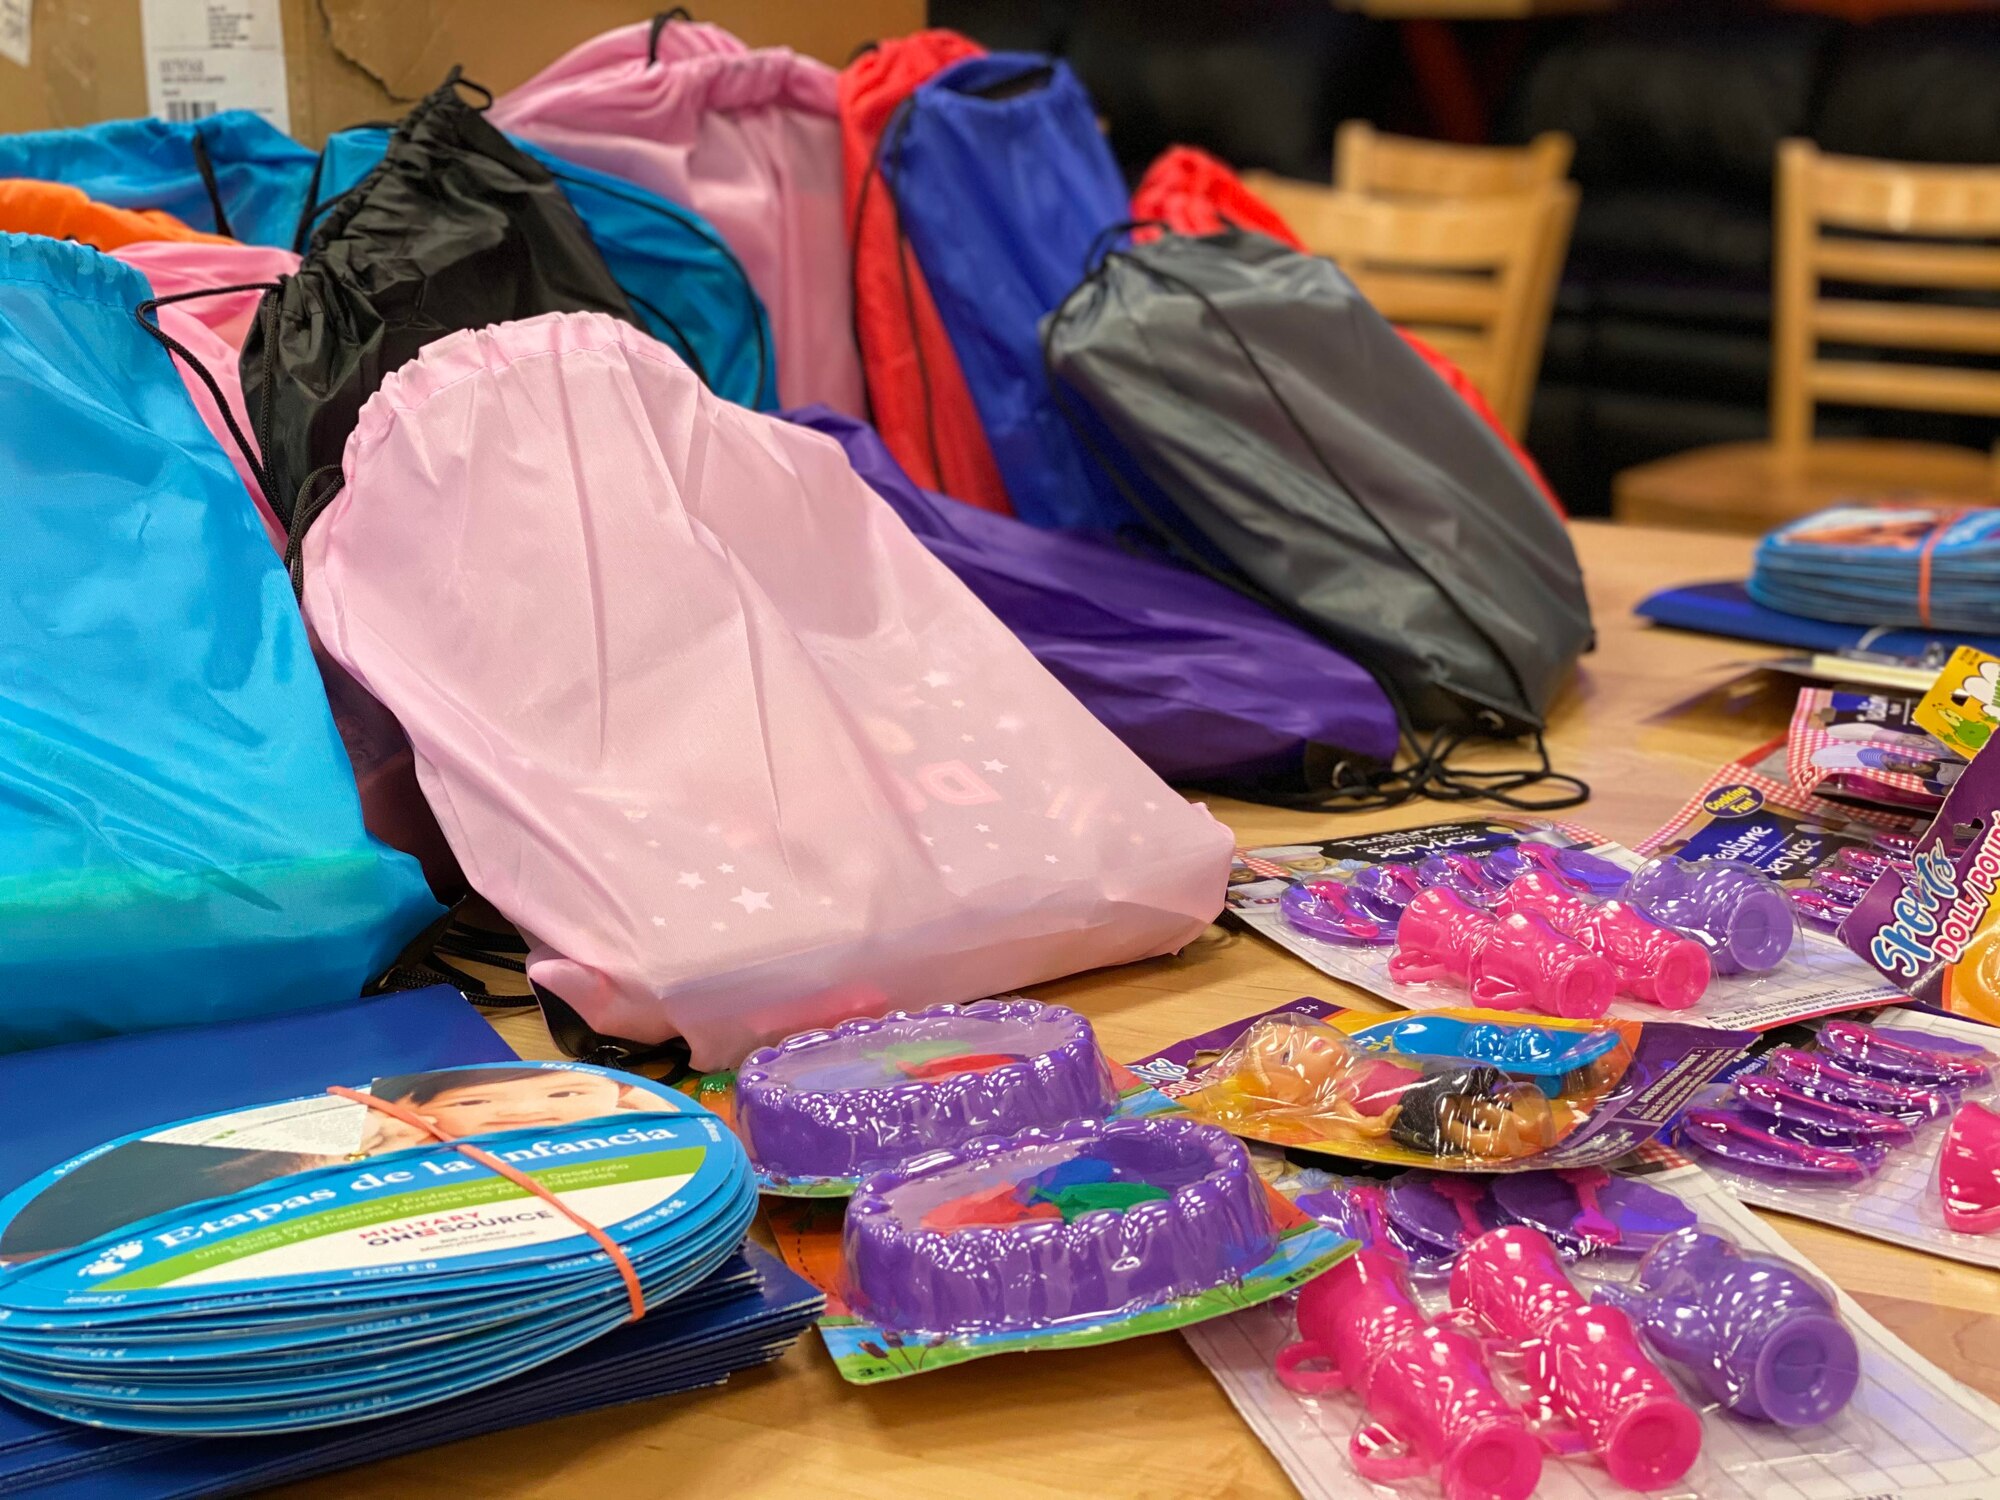 One hundred backpacks filled with school supplies, provided by 446th Airman and Family Readiness, were given to Reserve Citizen Airmen during a Baby Bundle + Kits for Kids event April 10 at Joint Base Lewis-McChord, Washington.